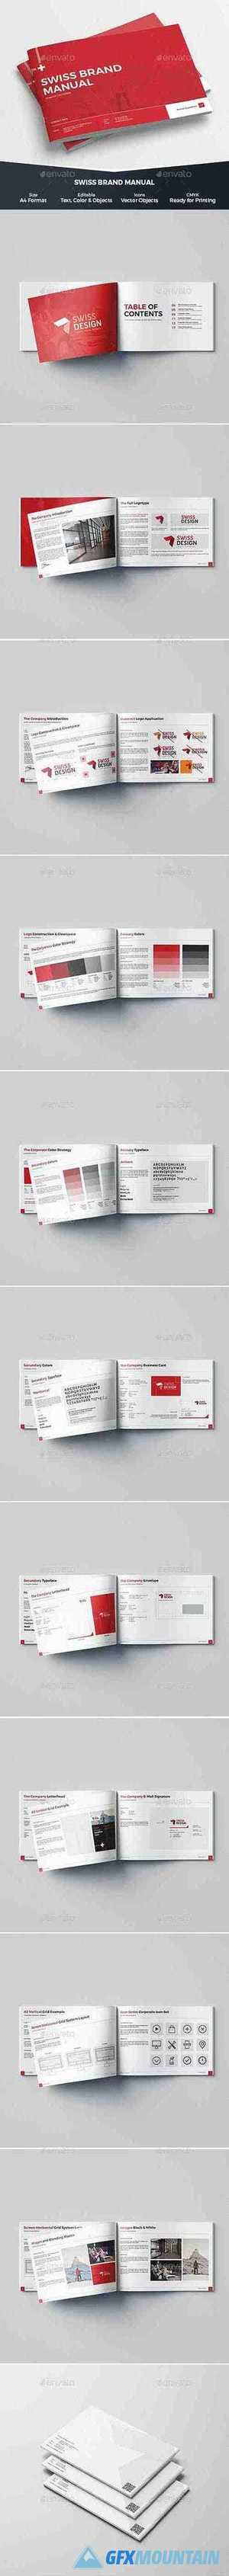 Brand Manual - Brand Guidelines 27821574